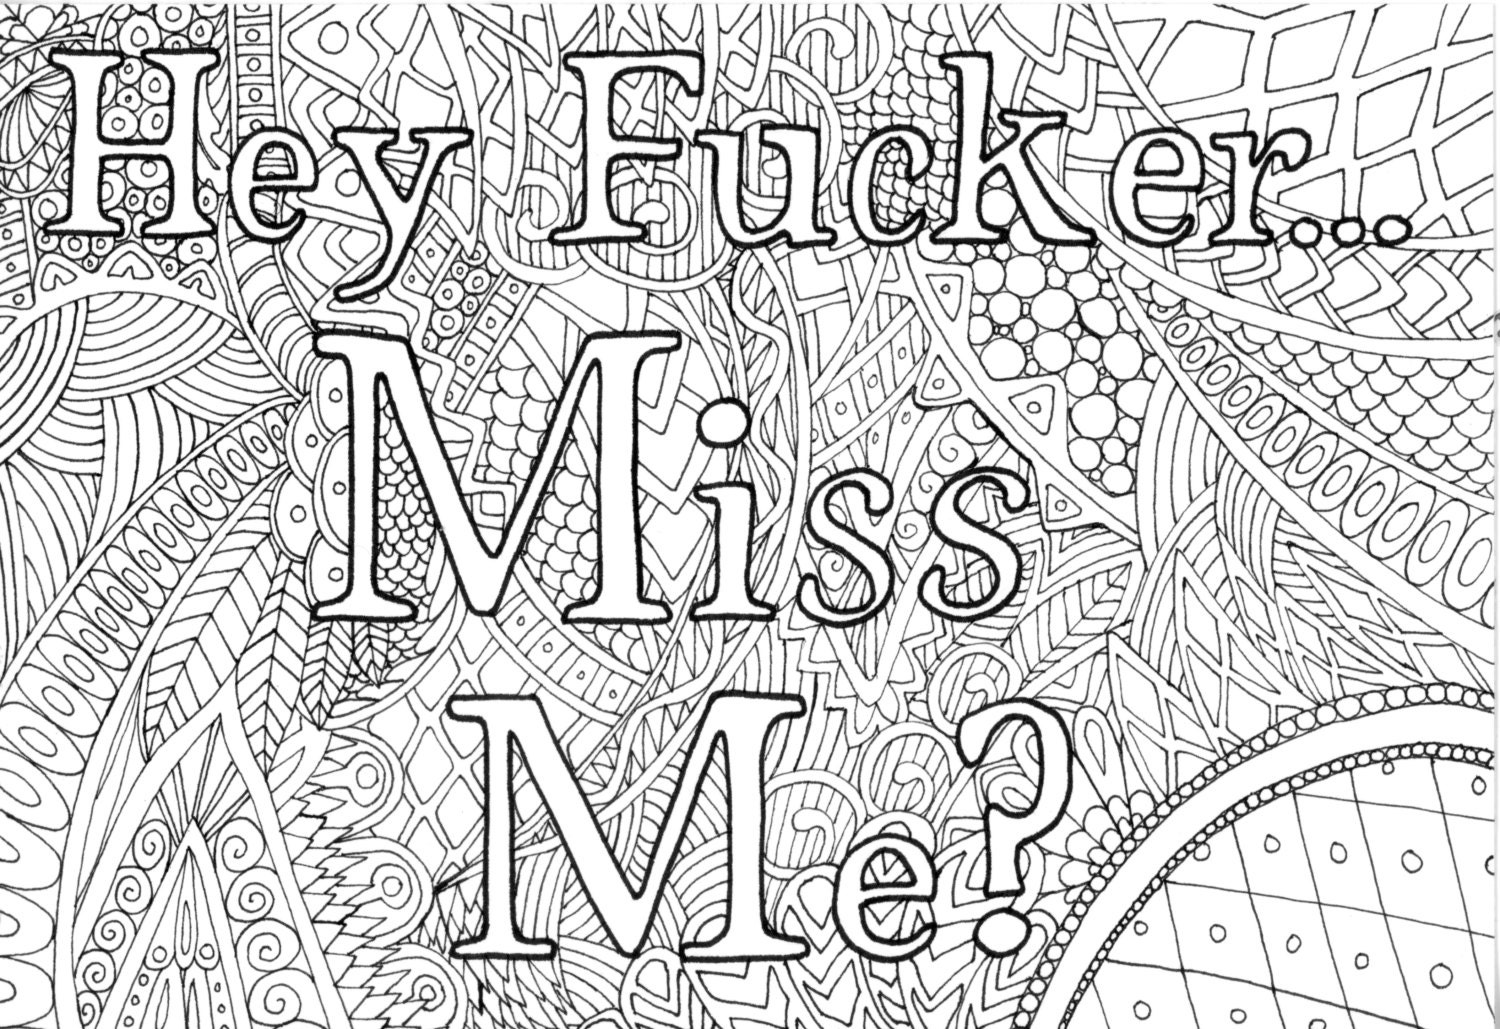 Download ADULT HUMOR Coloring Pages F Bomb Coloring Book Pages Swear